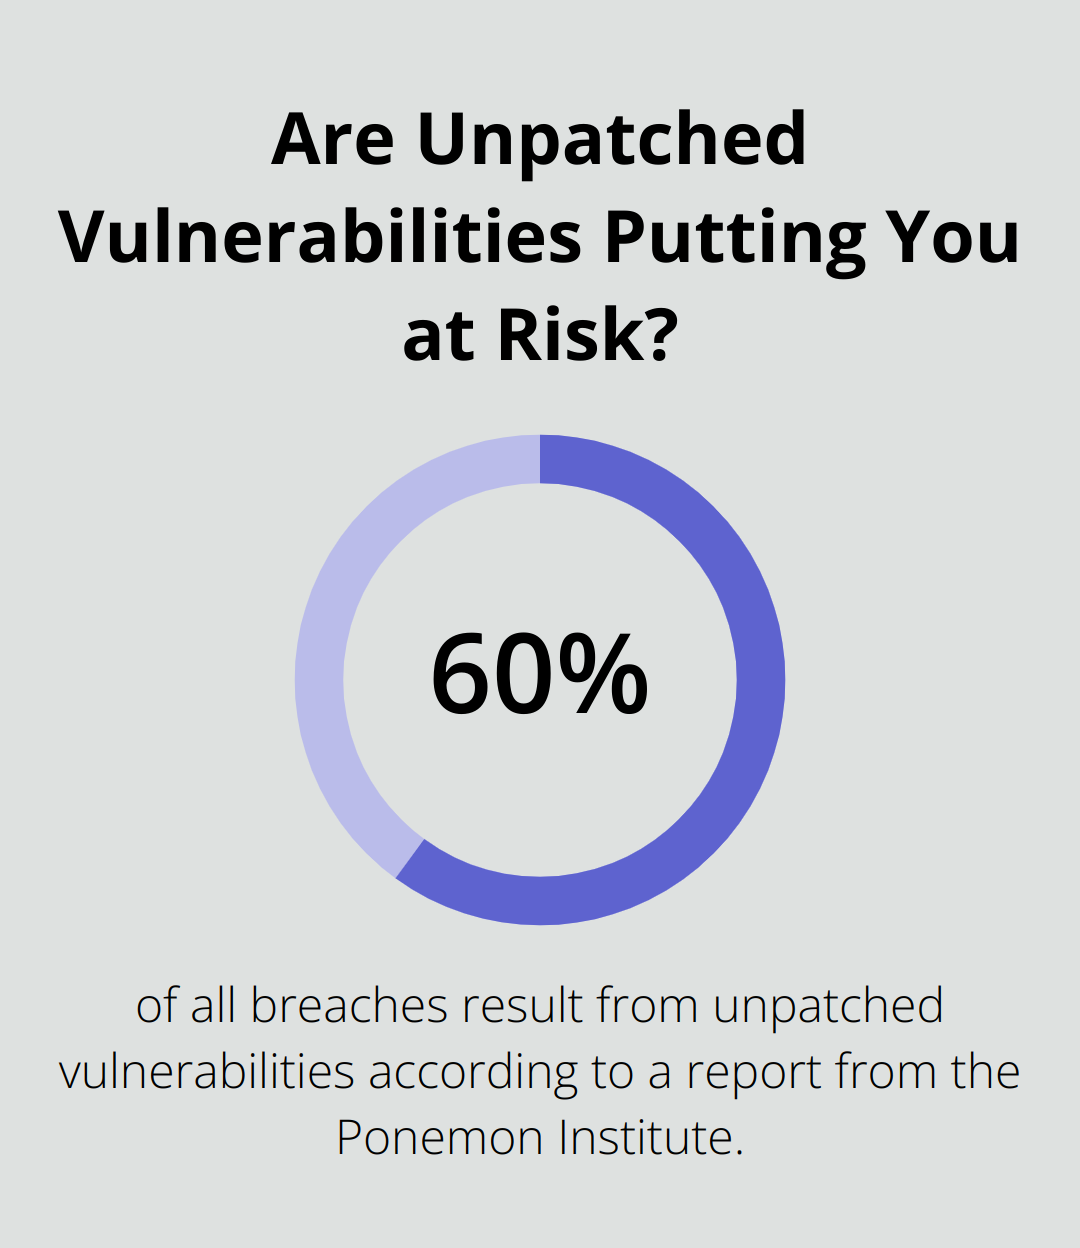 Are Unpatched Vulnerabilities Putting You at Risk?